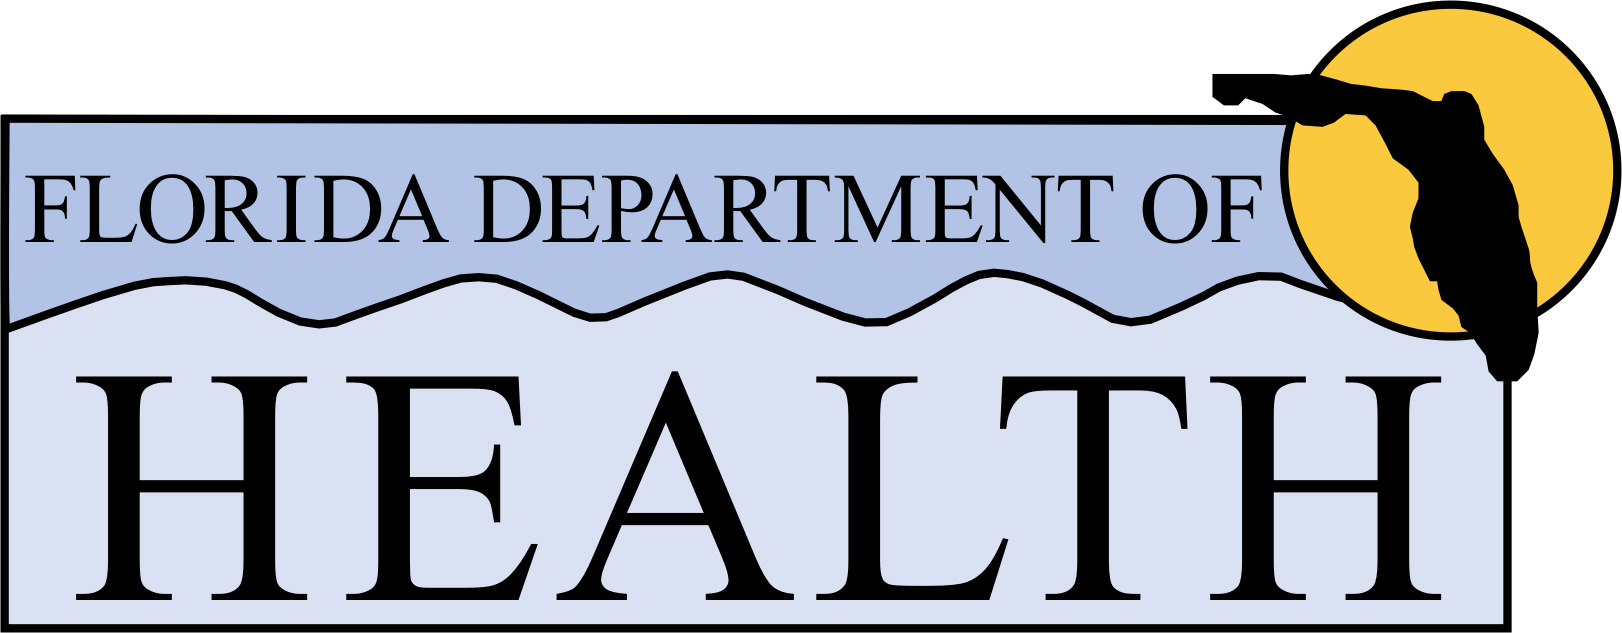 COUNTY OFFICES OF THE FLORIDA DEPARTMENT OF HEALTH ACHIEVE NATIONAL